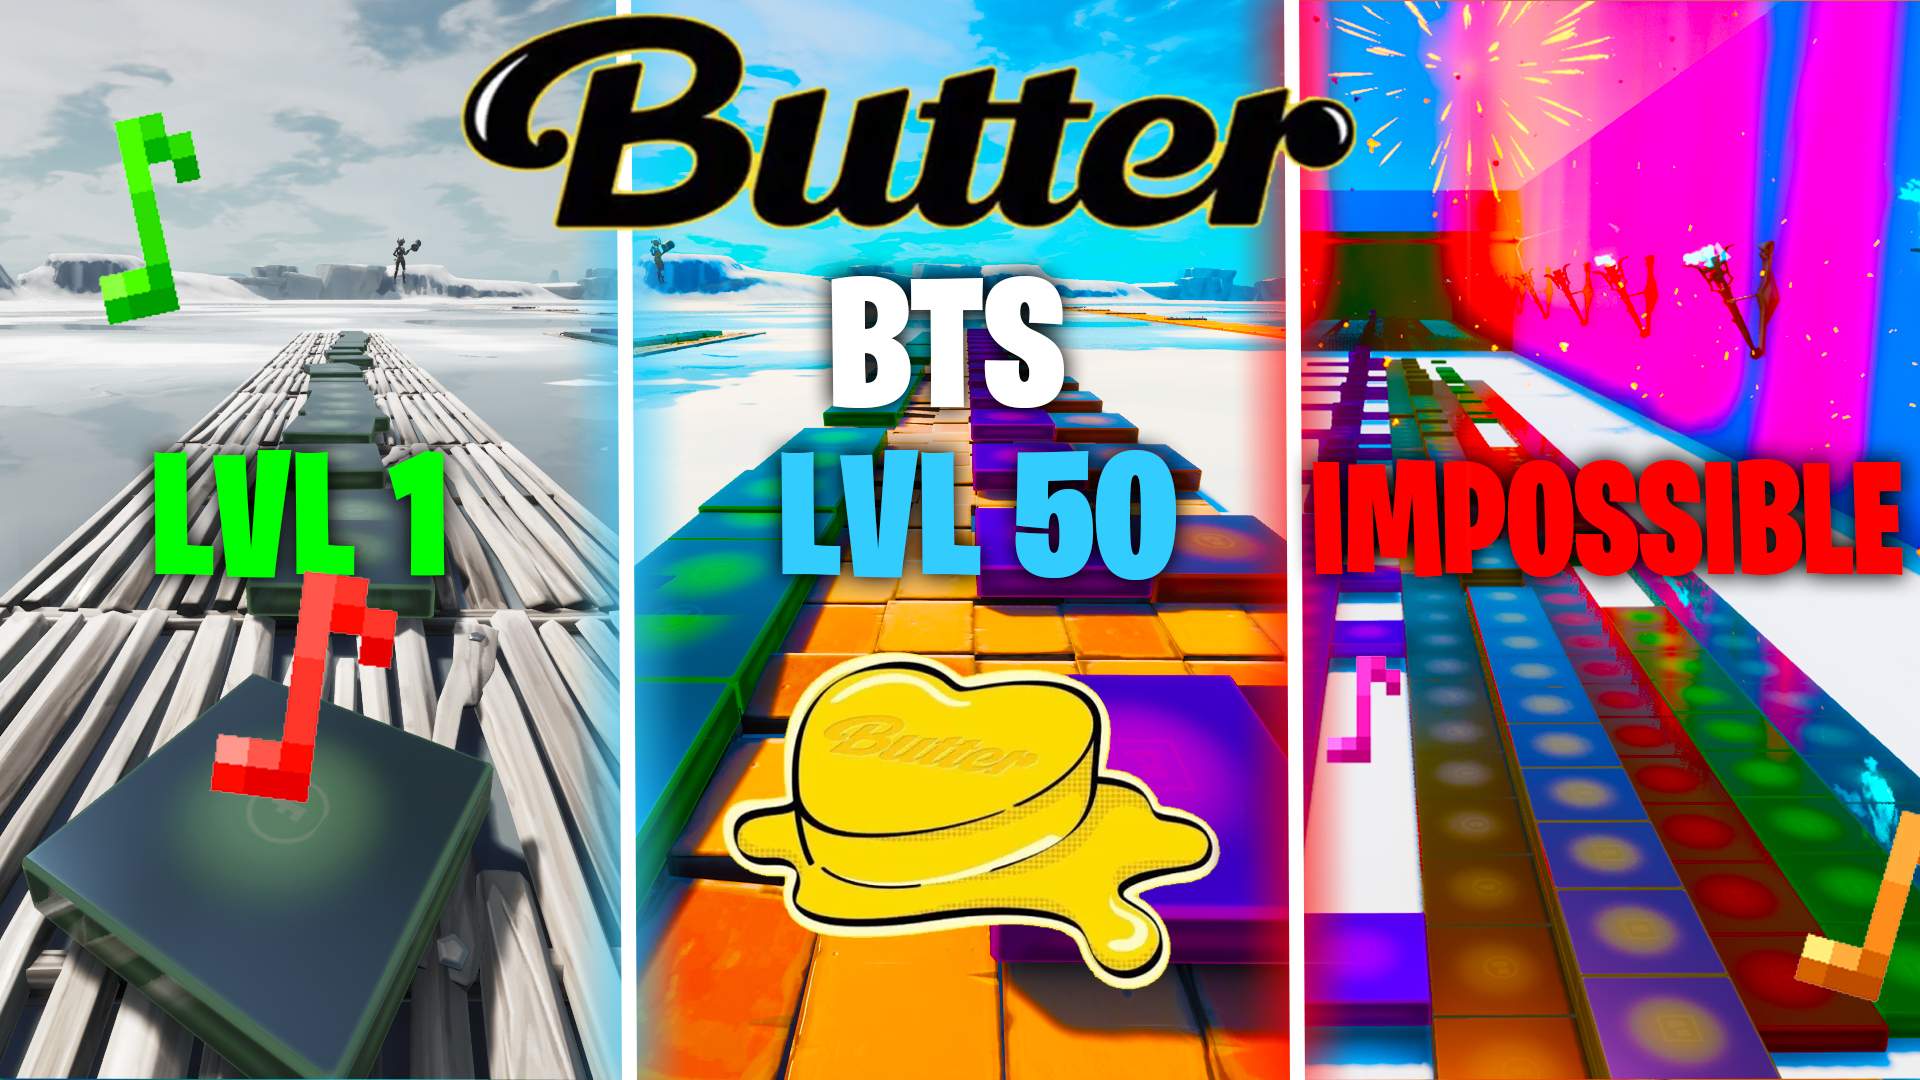 BTS - BUTTER BUT IN 3 LEVELS